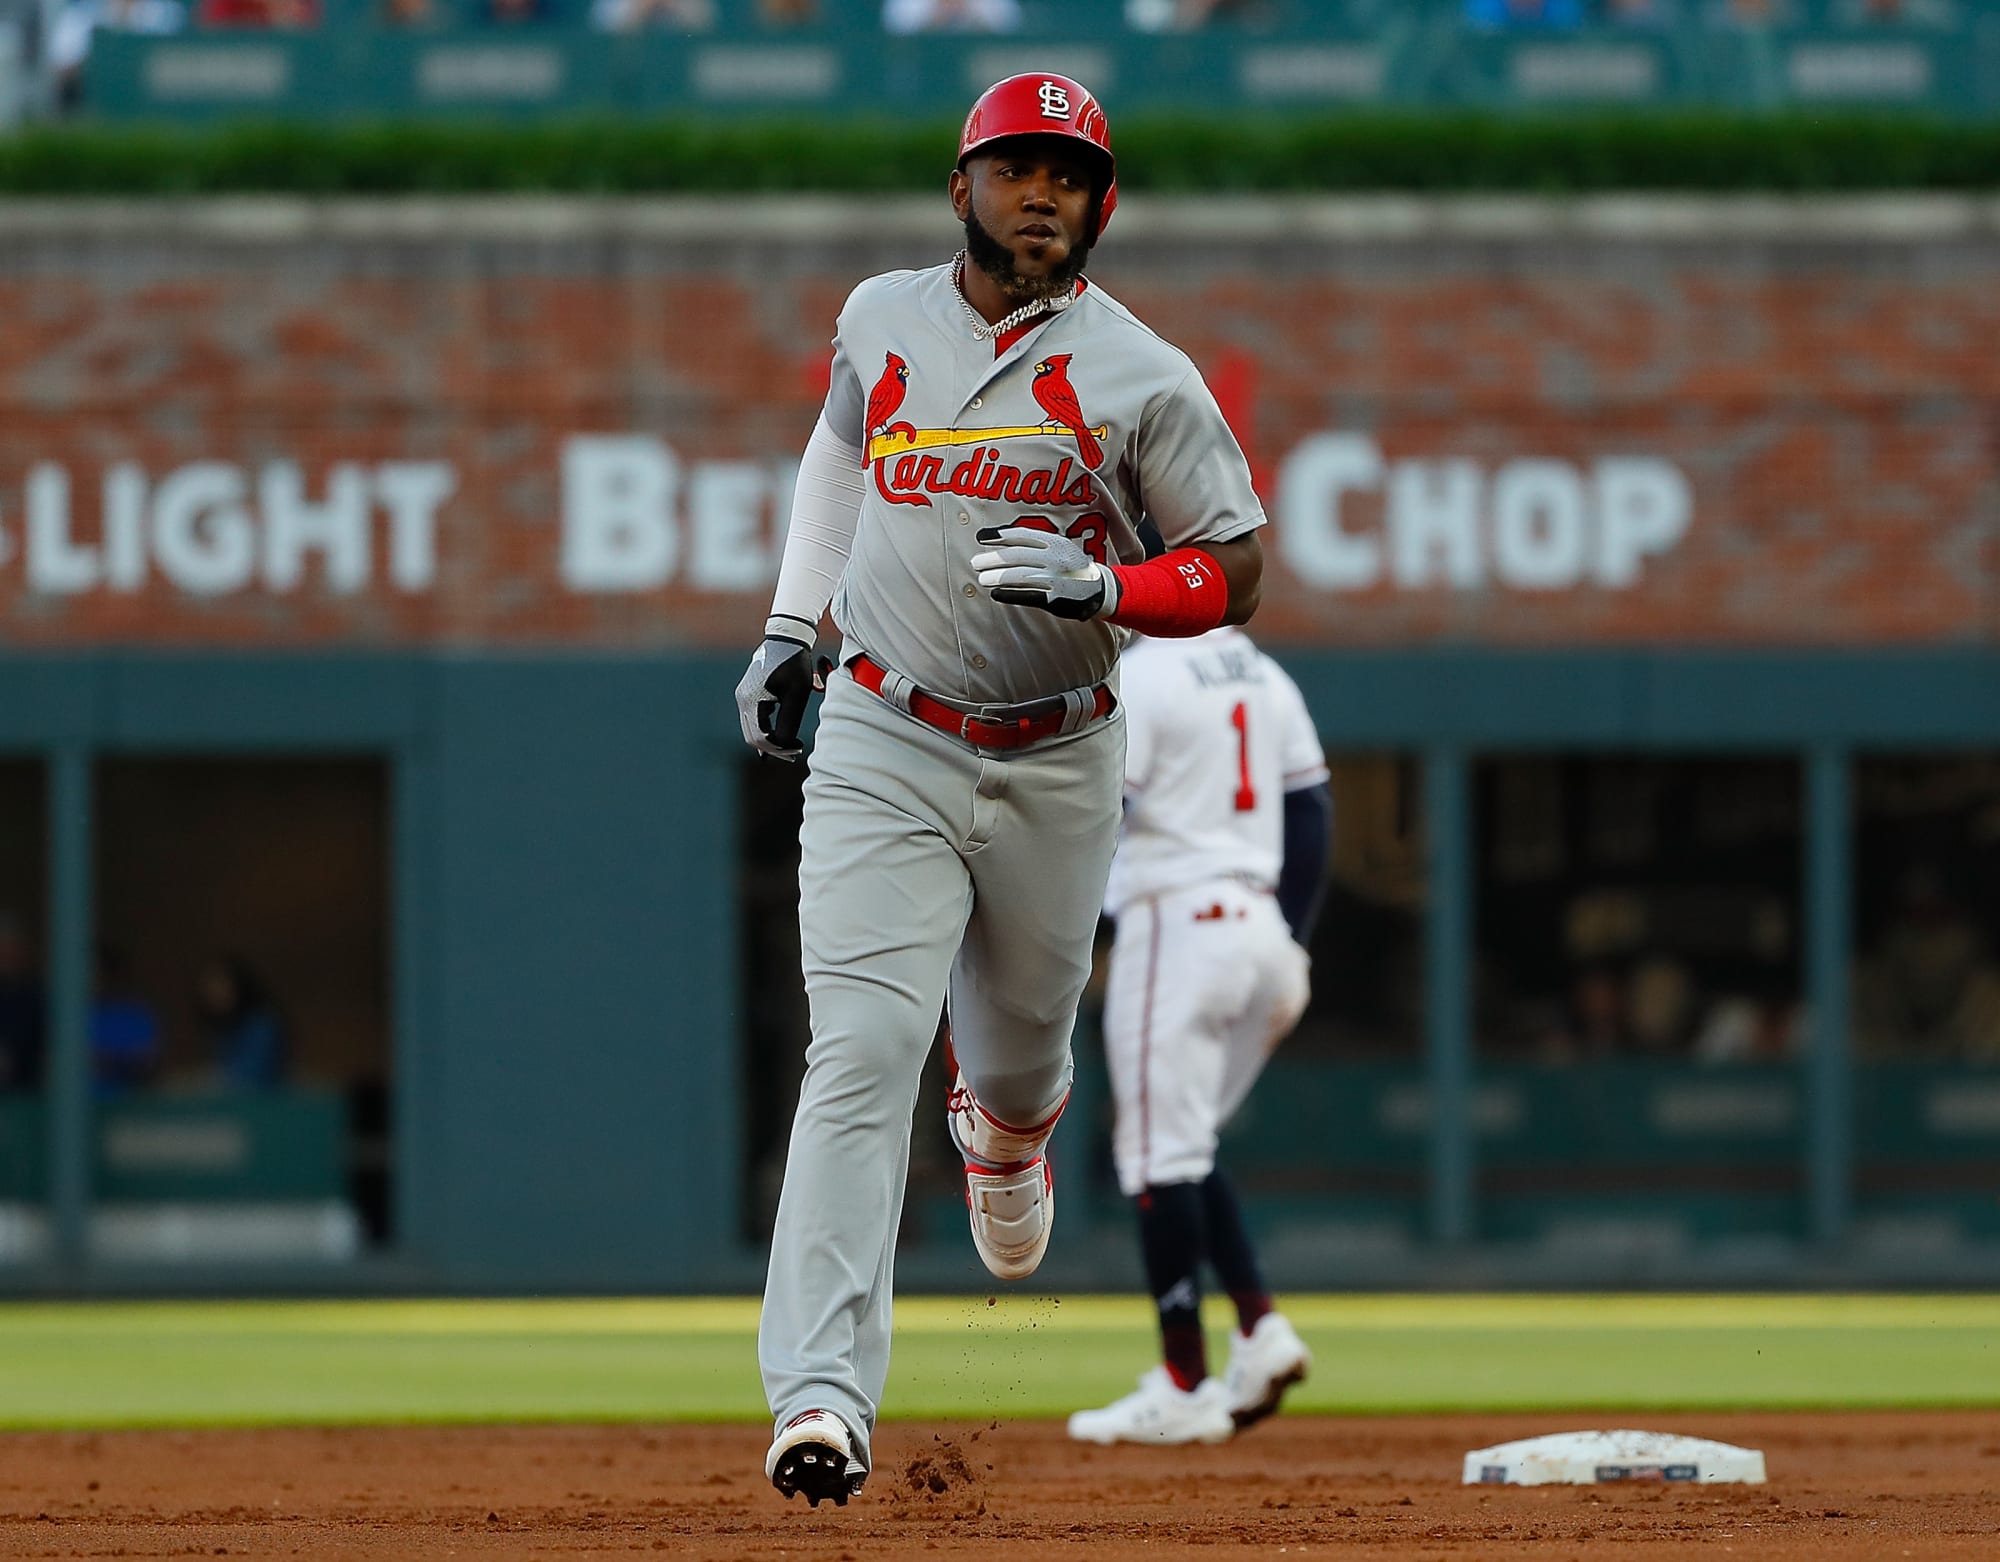 St. Louis Cardinals NLDS Preview: Looking at the season series